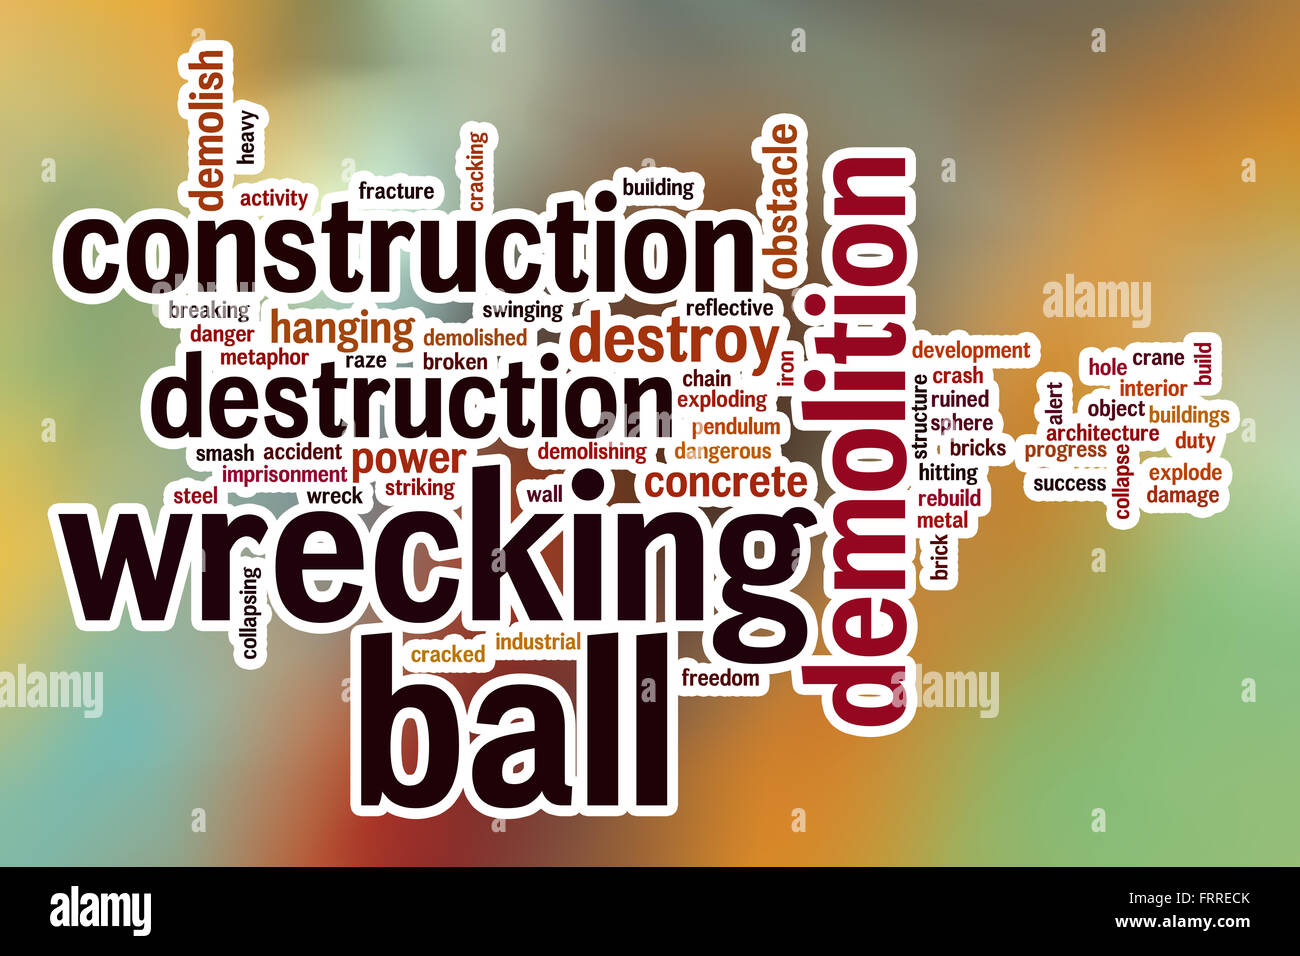 Wrecking ball word cloud concept with abstract background Stock Photo